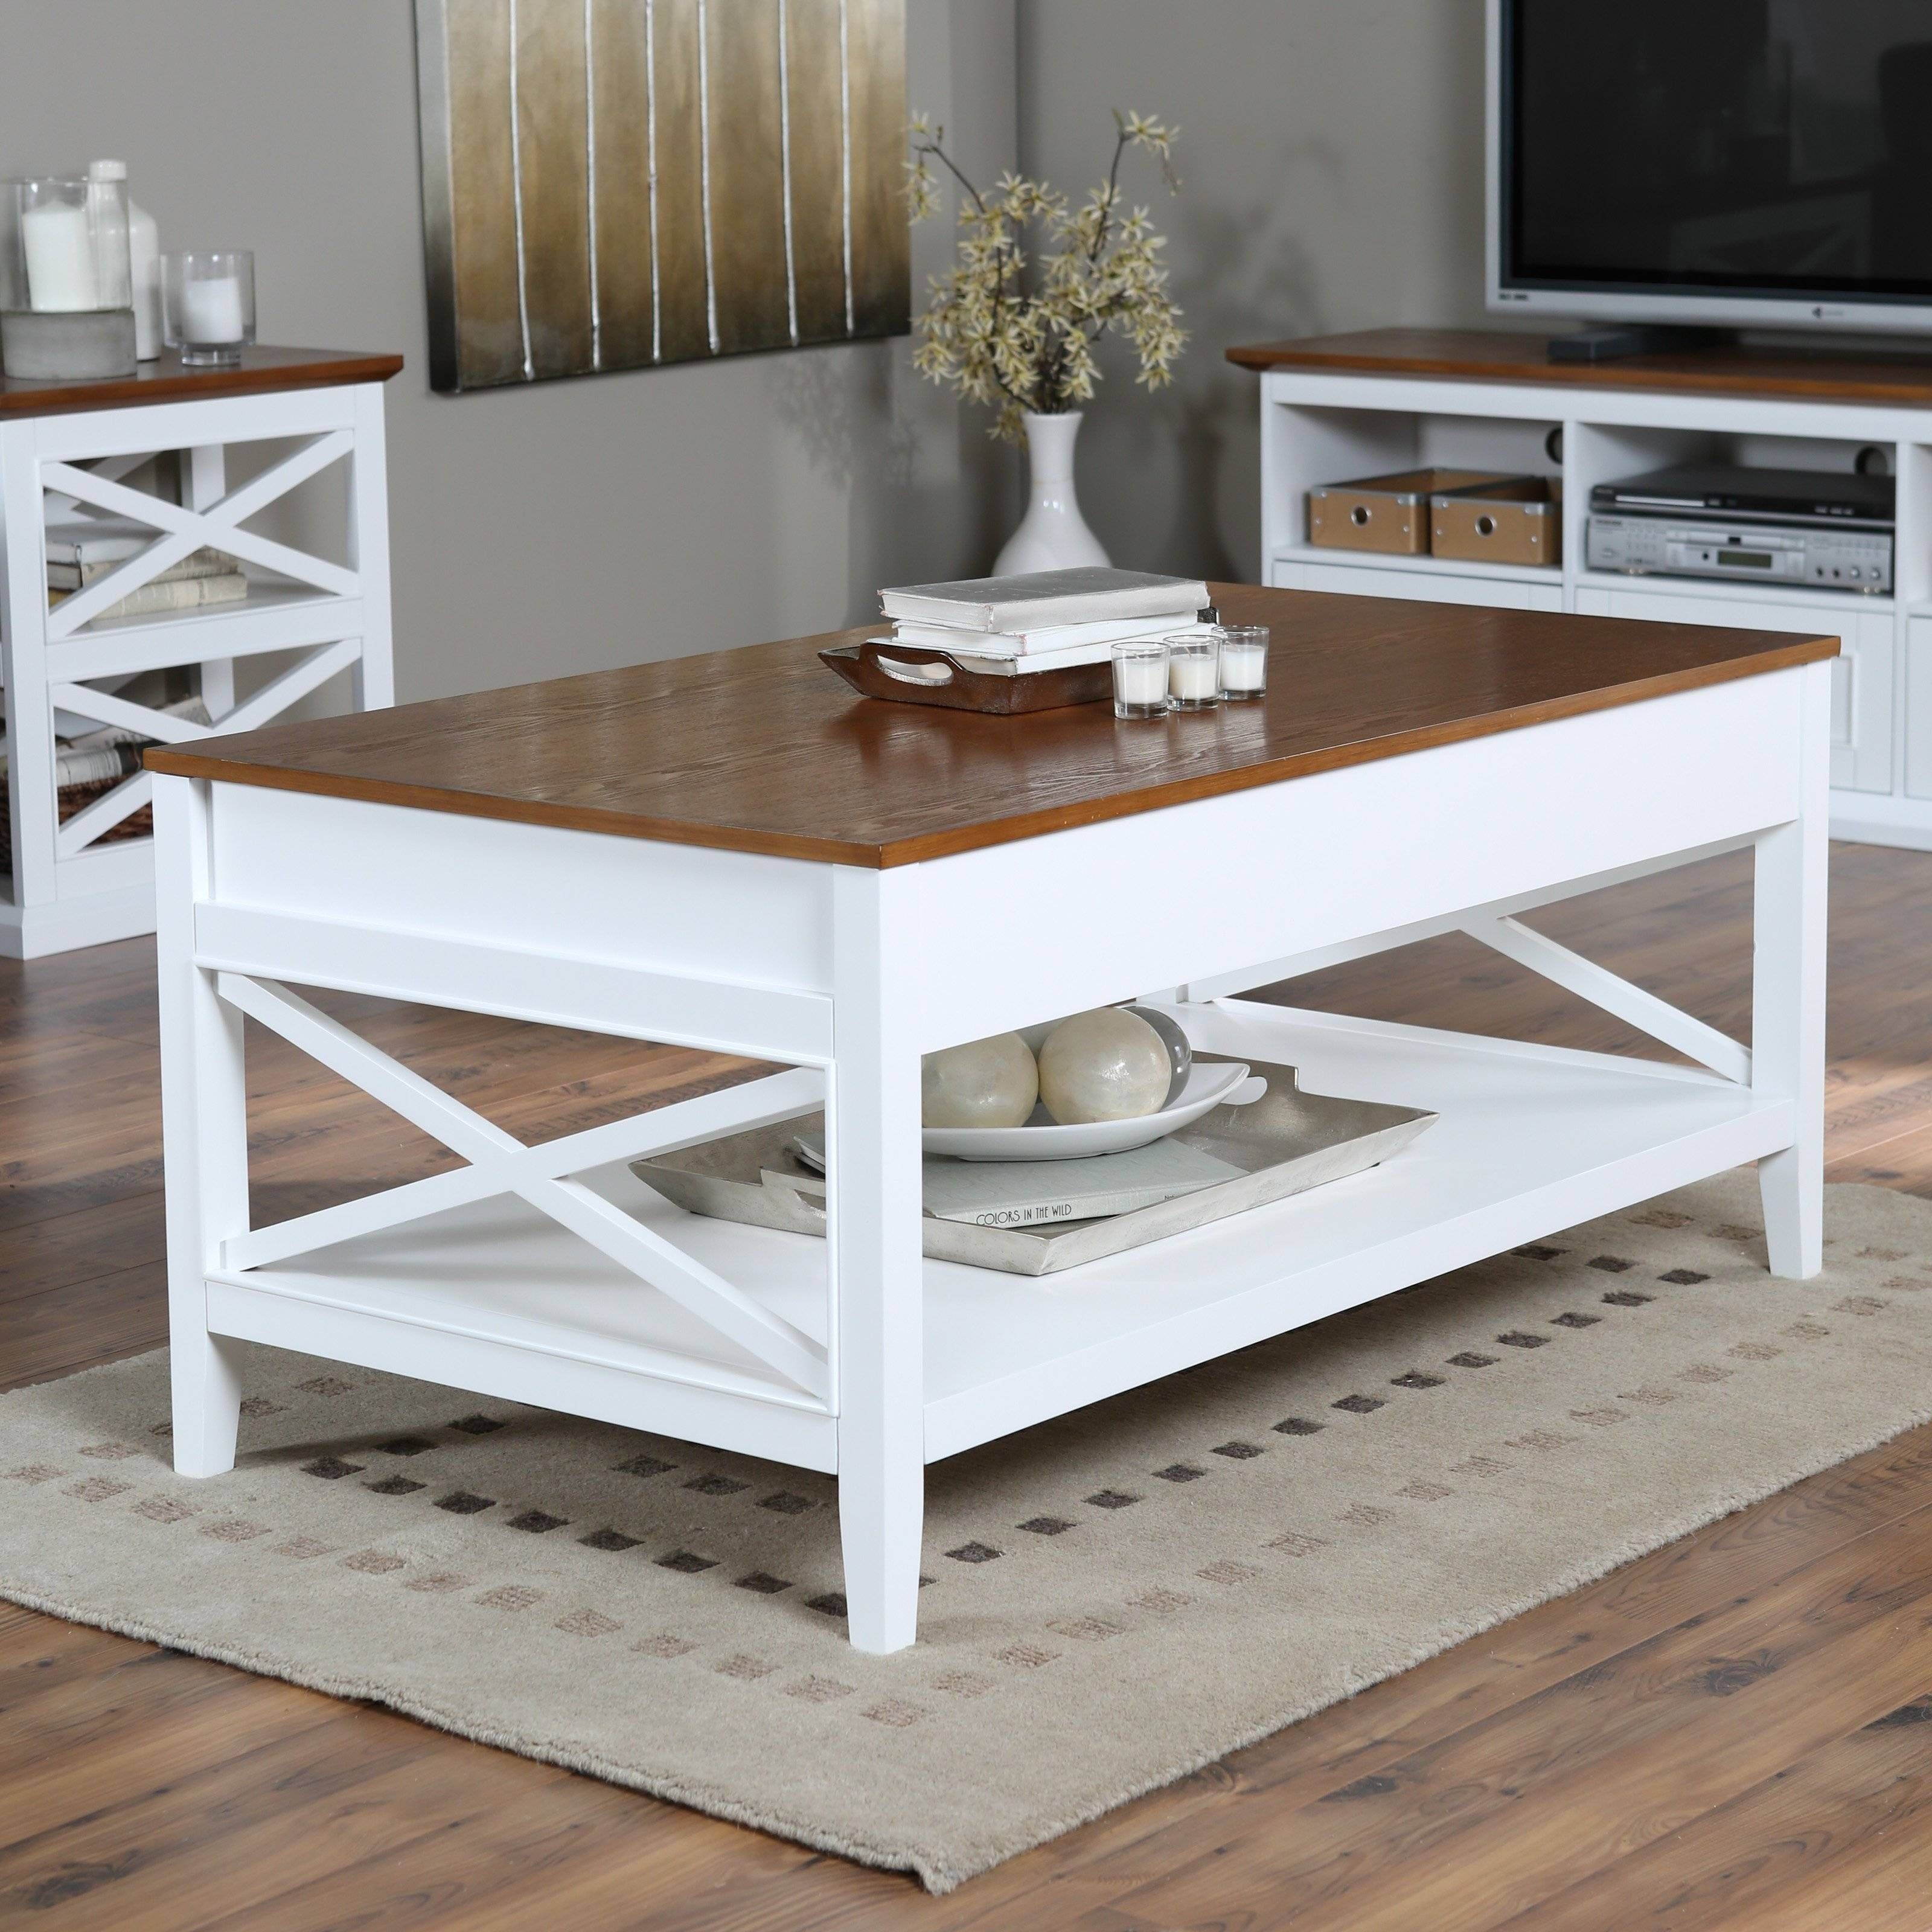 Coffee Table: Enchanting White And Wood Coffee Table Design Ideas Pertaining To White Cottage Style Coffee Tables (View 23 of 30)